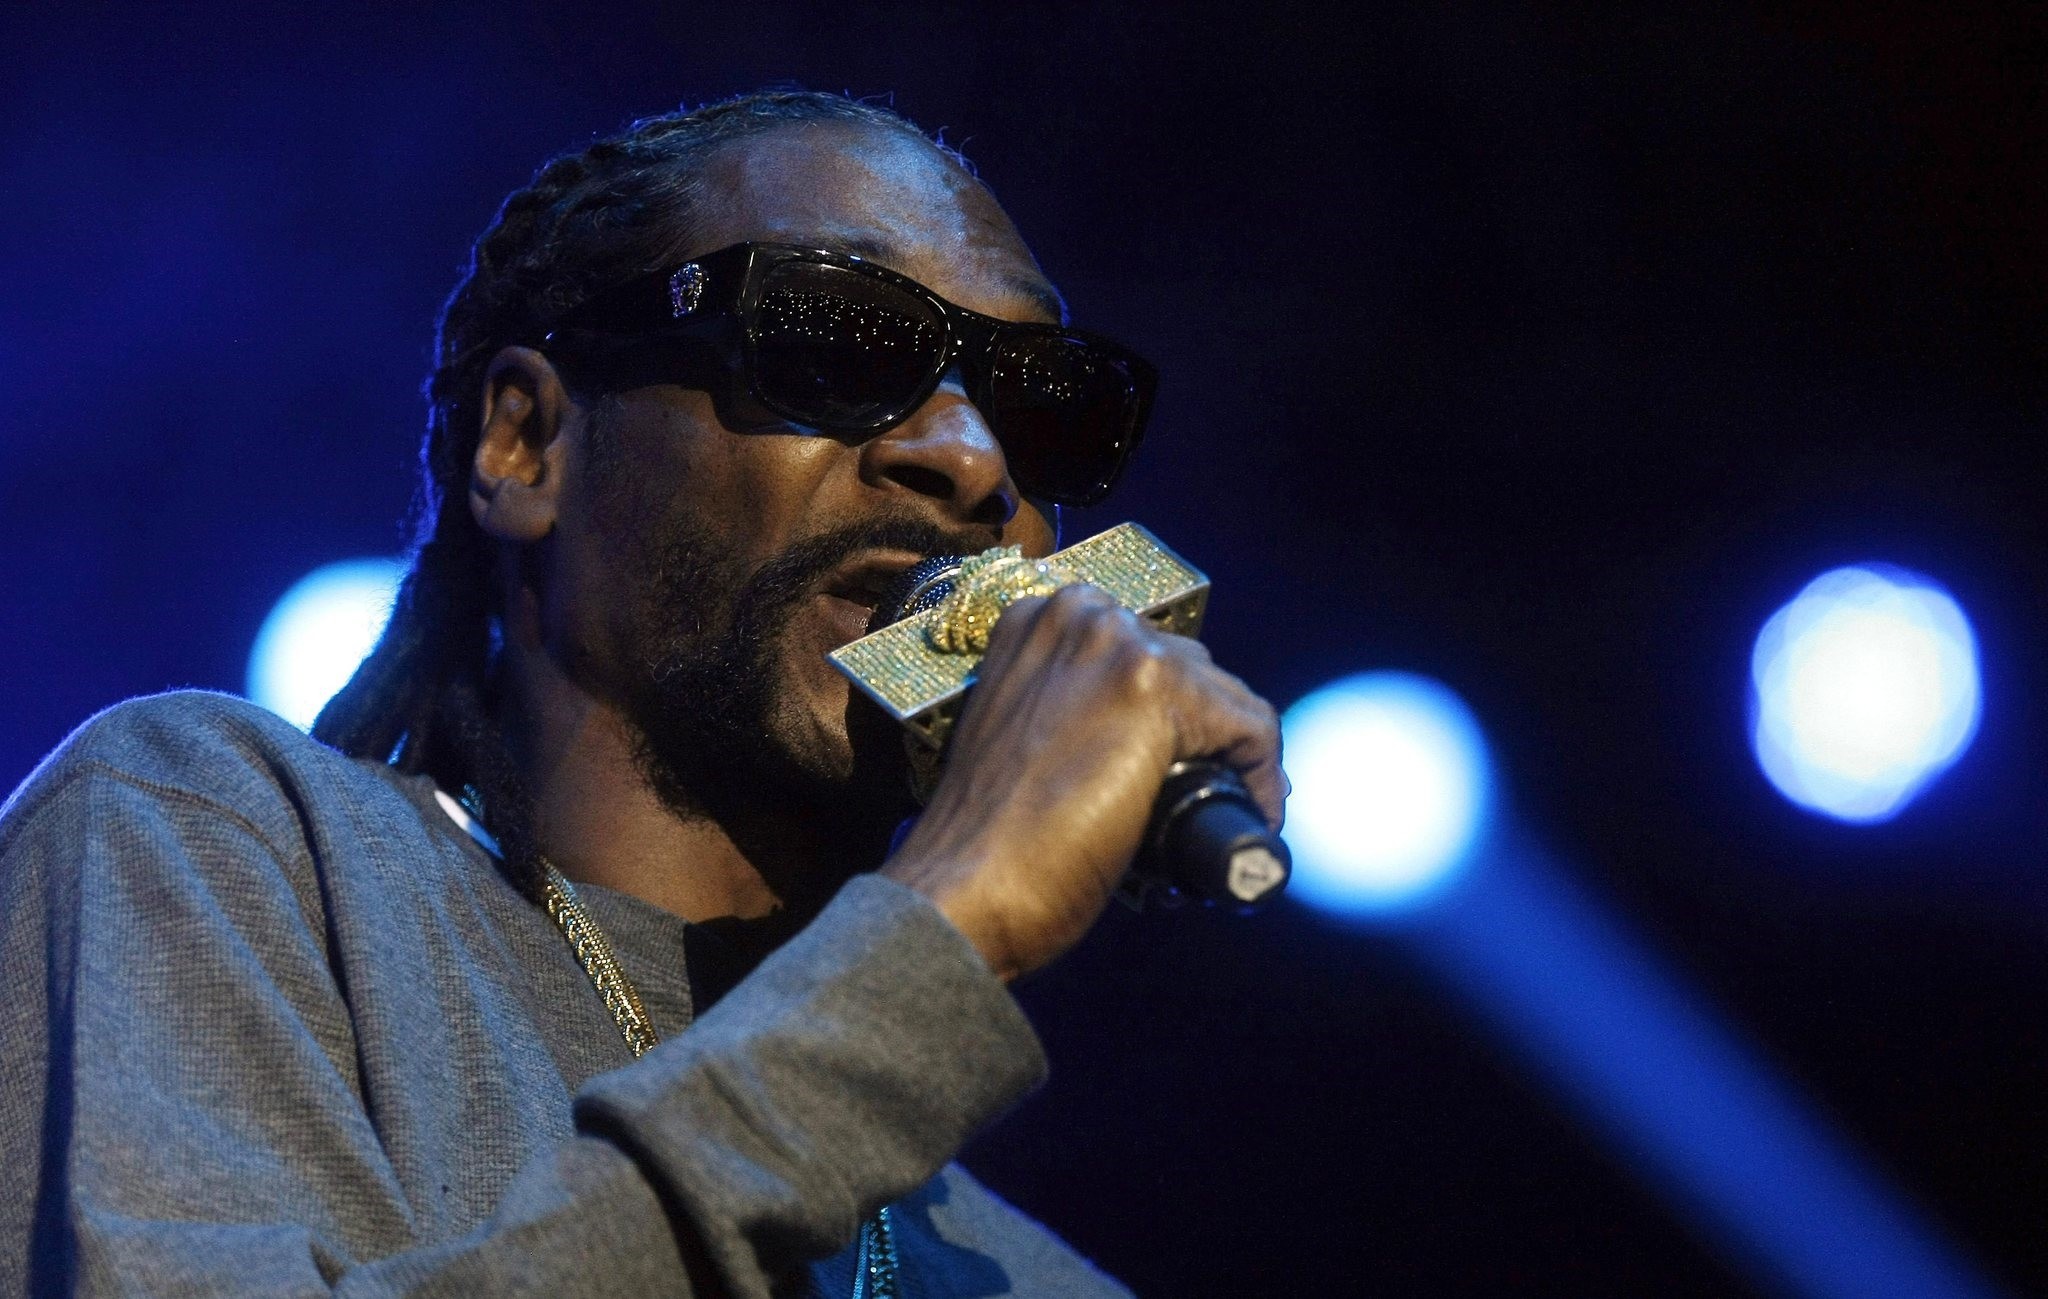 A file picture dated 11 March 2016 shows US rapper Snoop Dogg performing during his concert in Medellin, Colombia. (EPA Photo)